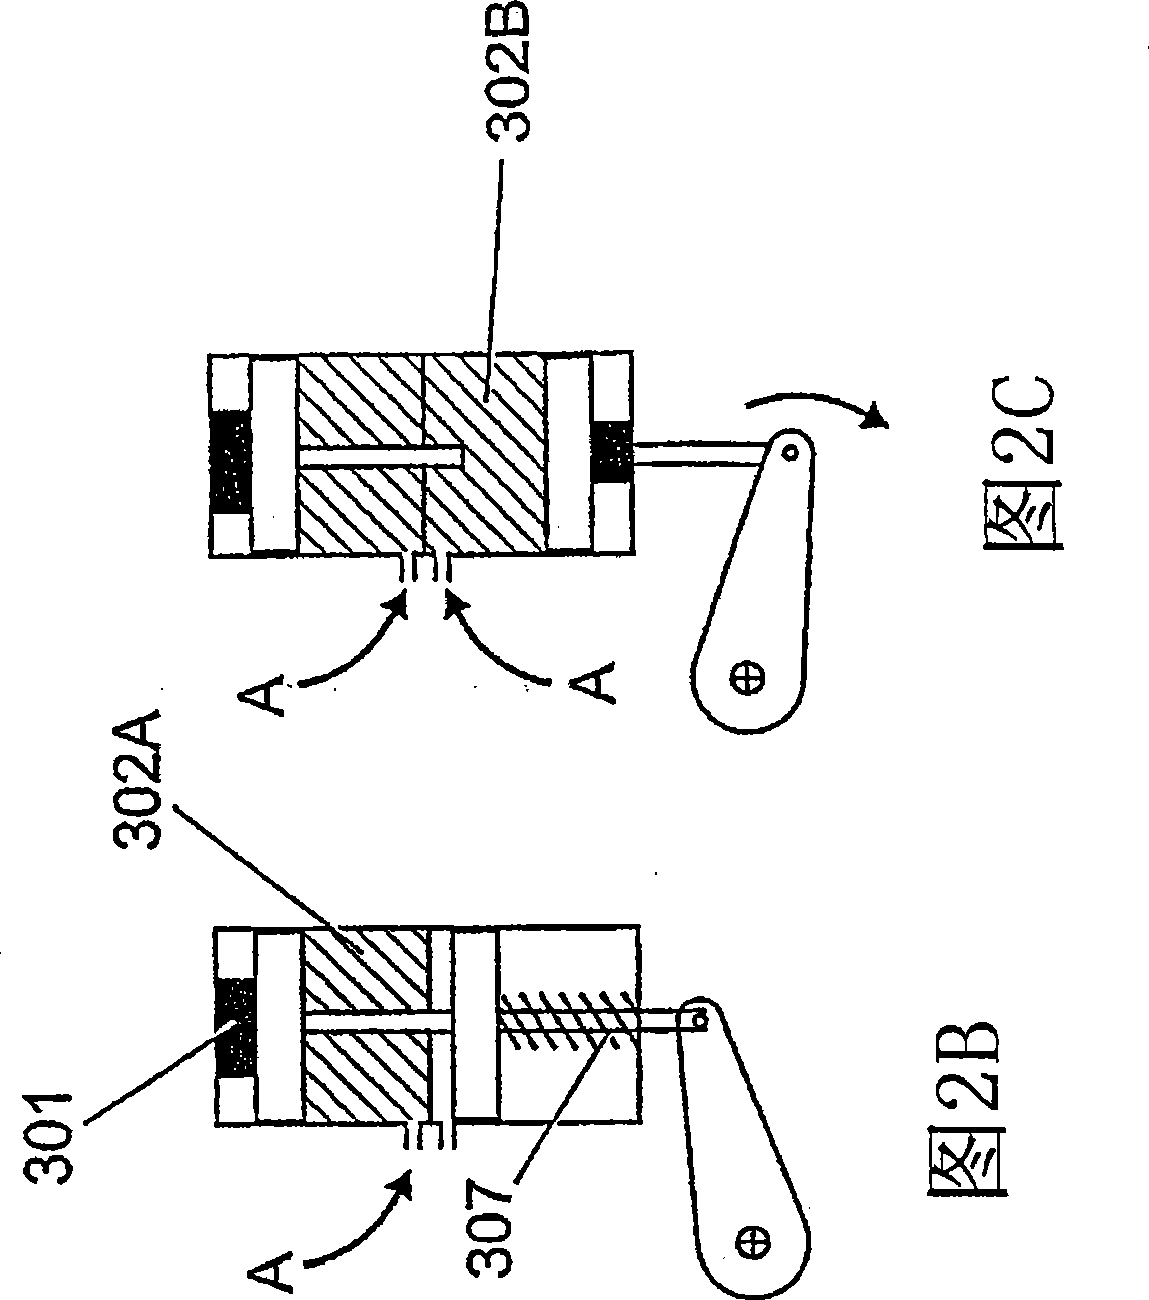 A system for automatically actuating the parking brake on a vehicle